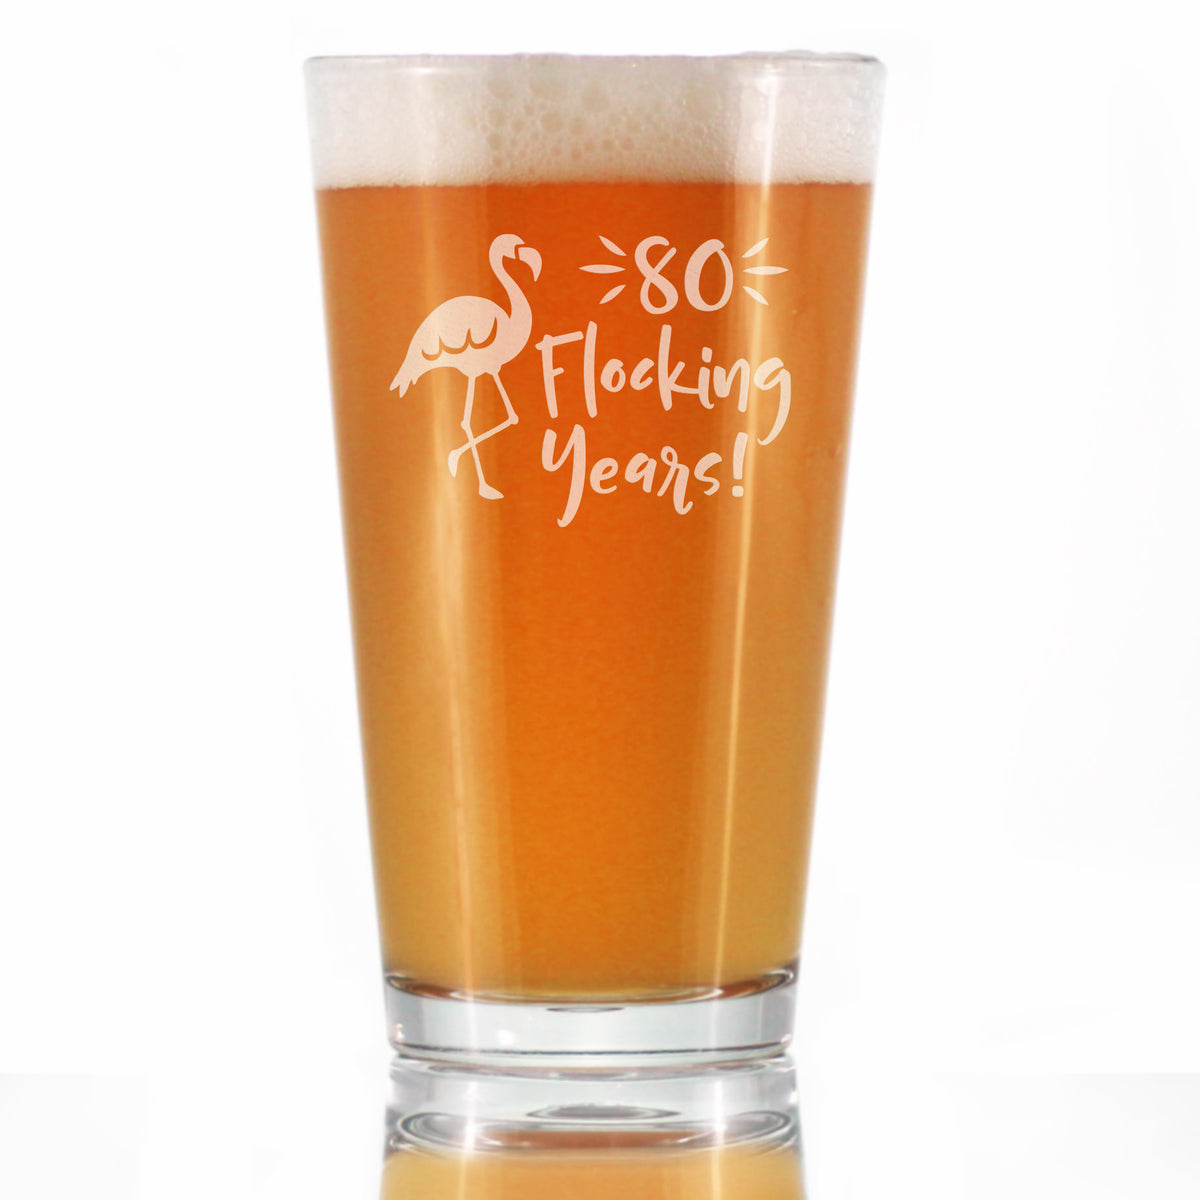 80 Flocking Years - 16 Ounce Pint Glass